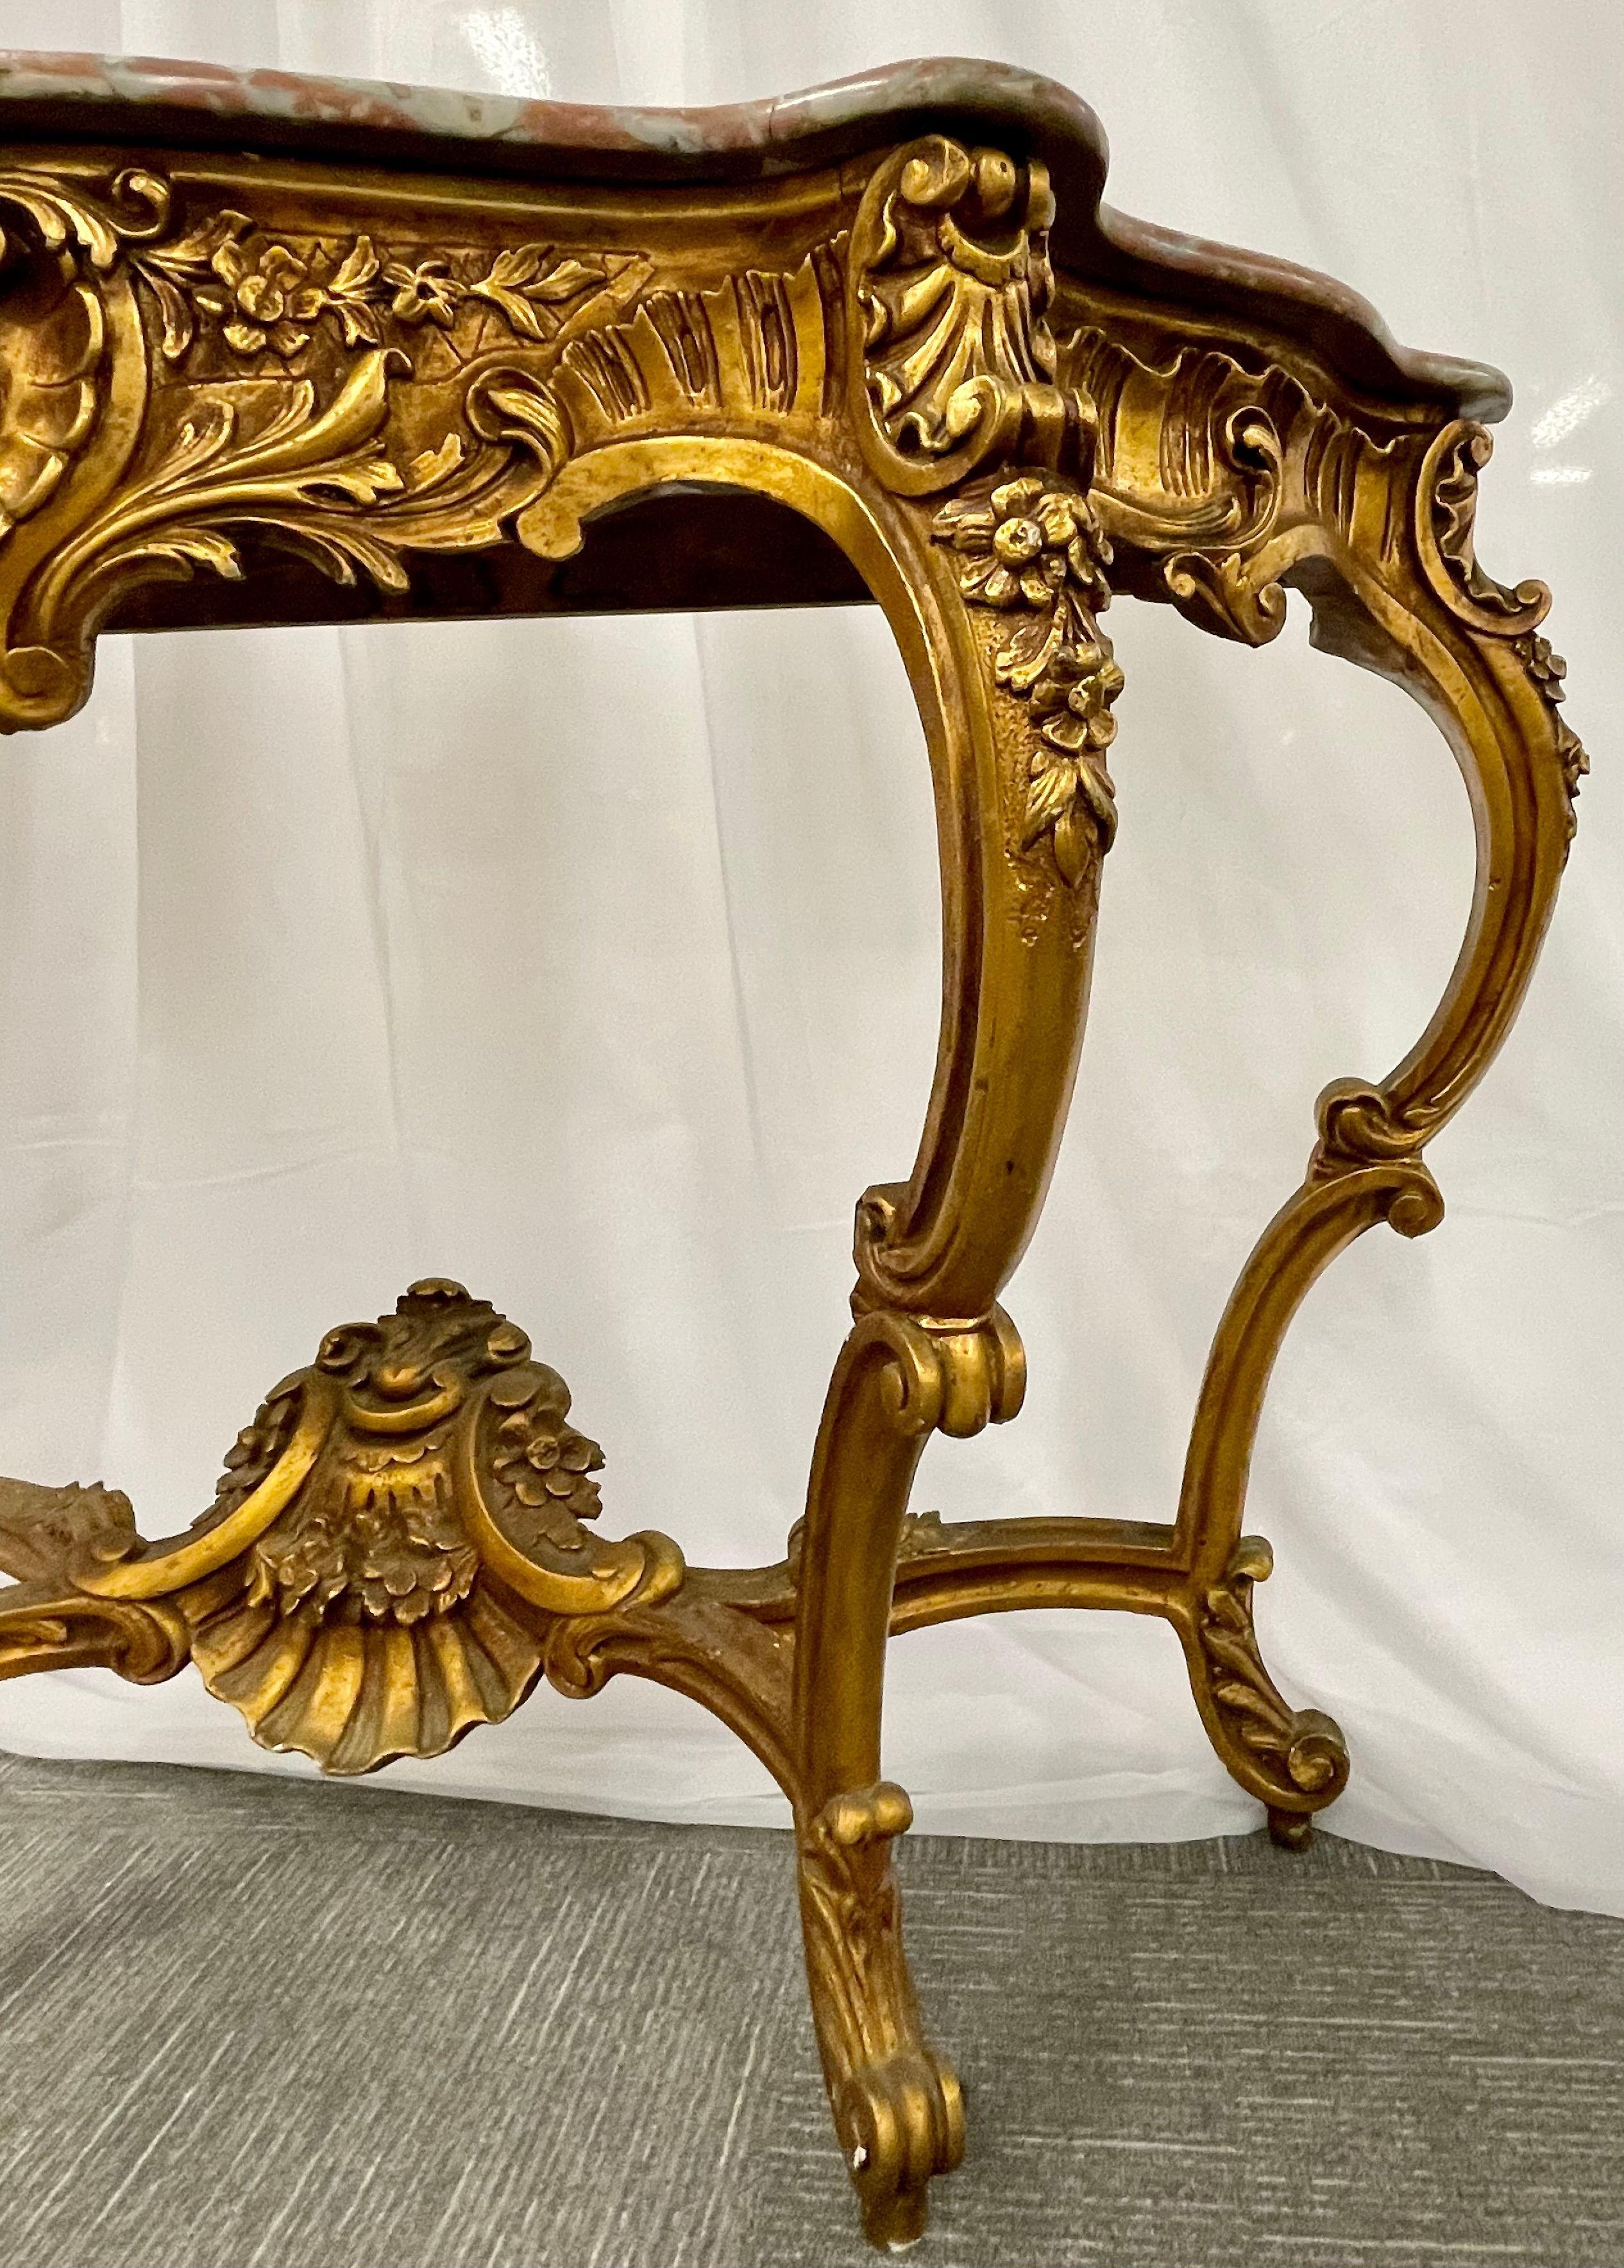 Marble-Top Louis XV Style Console Table by Jansen Exquisite Carved Details 1920s For Sale 2